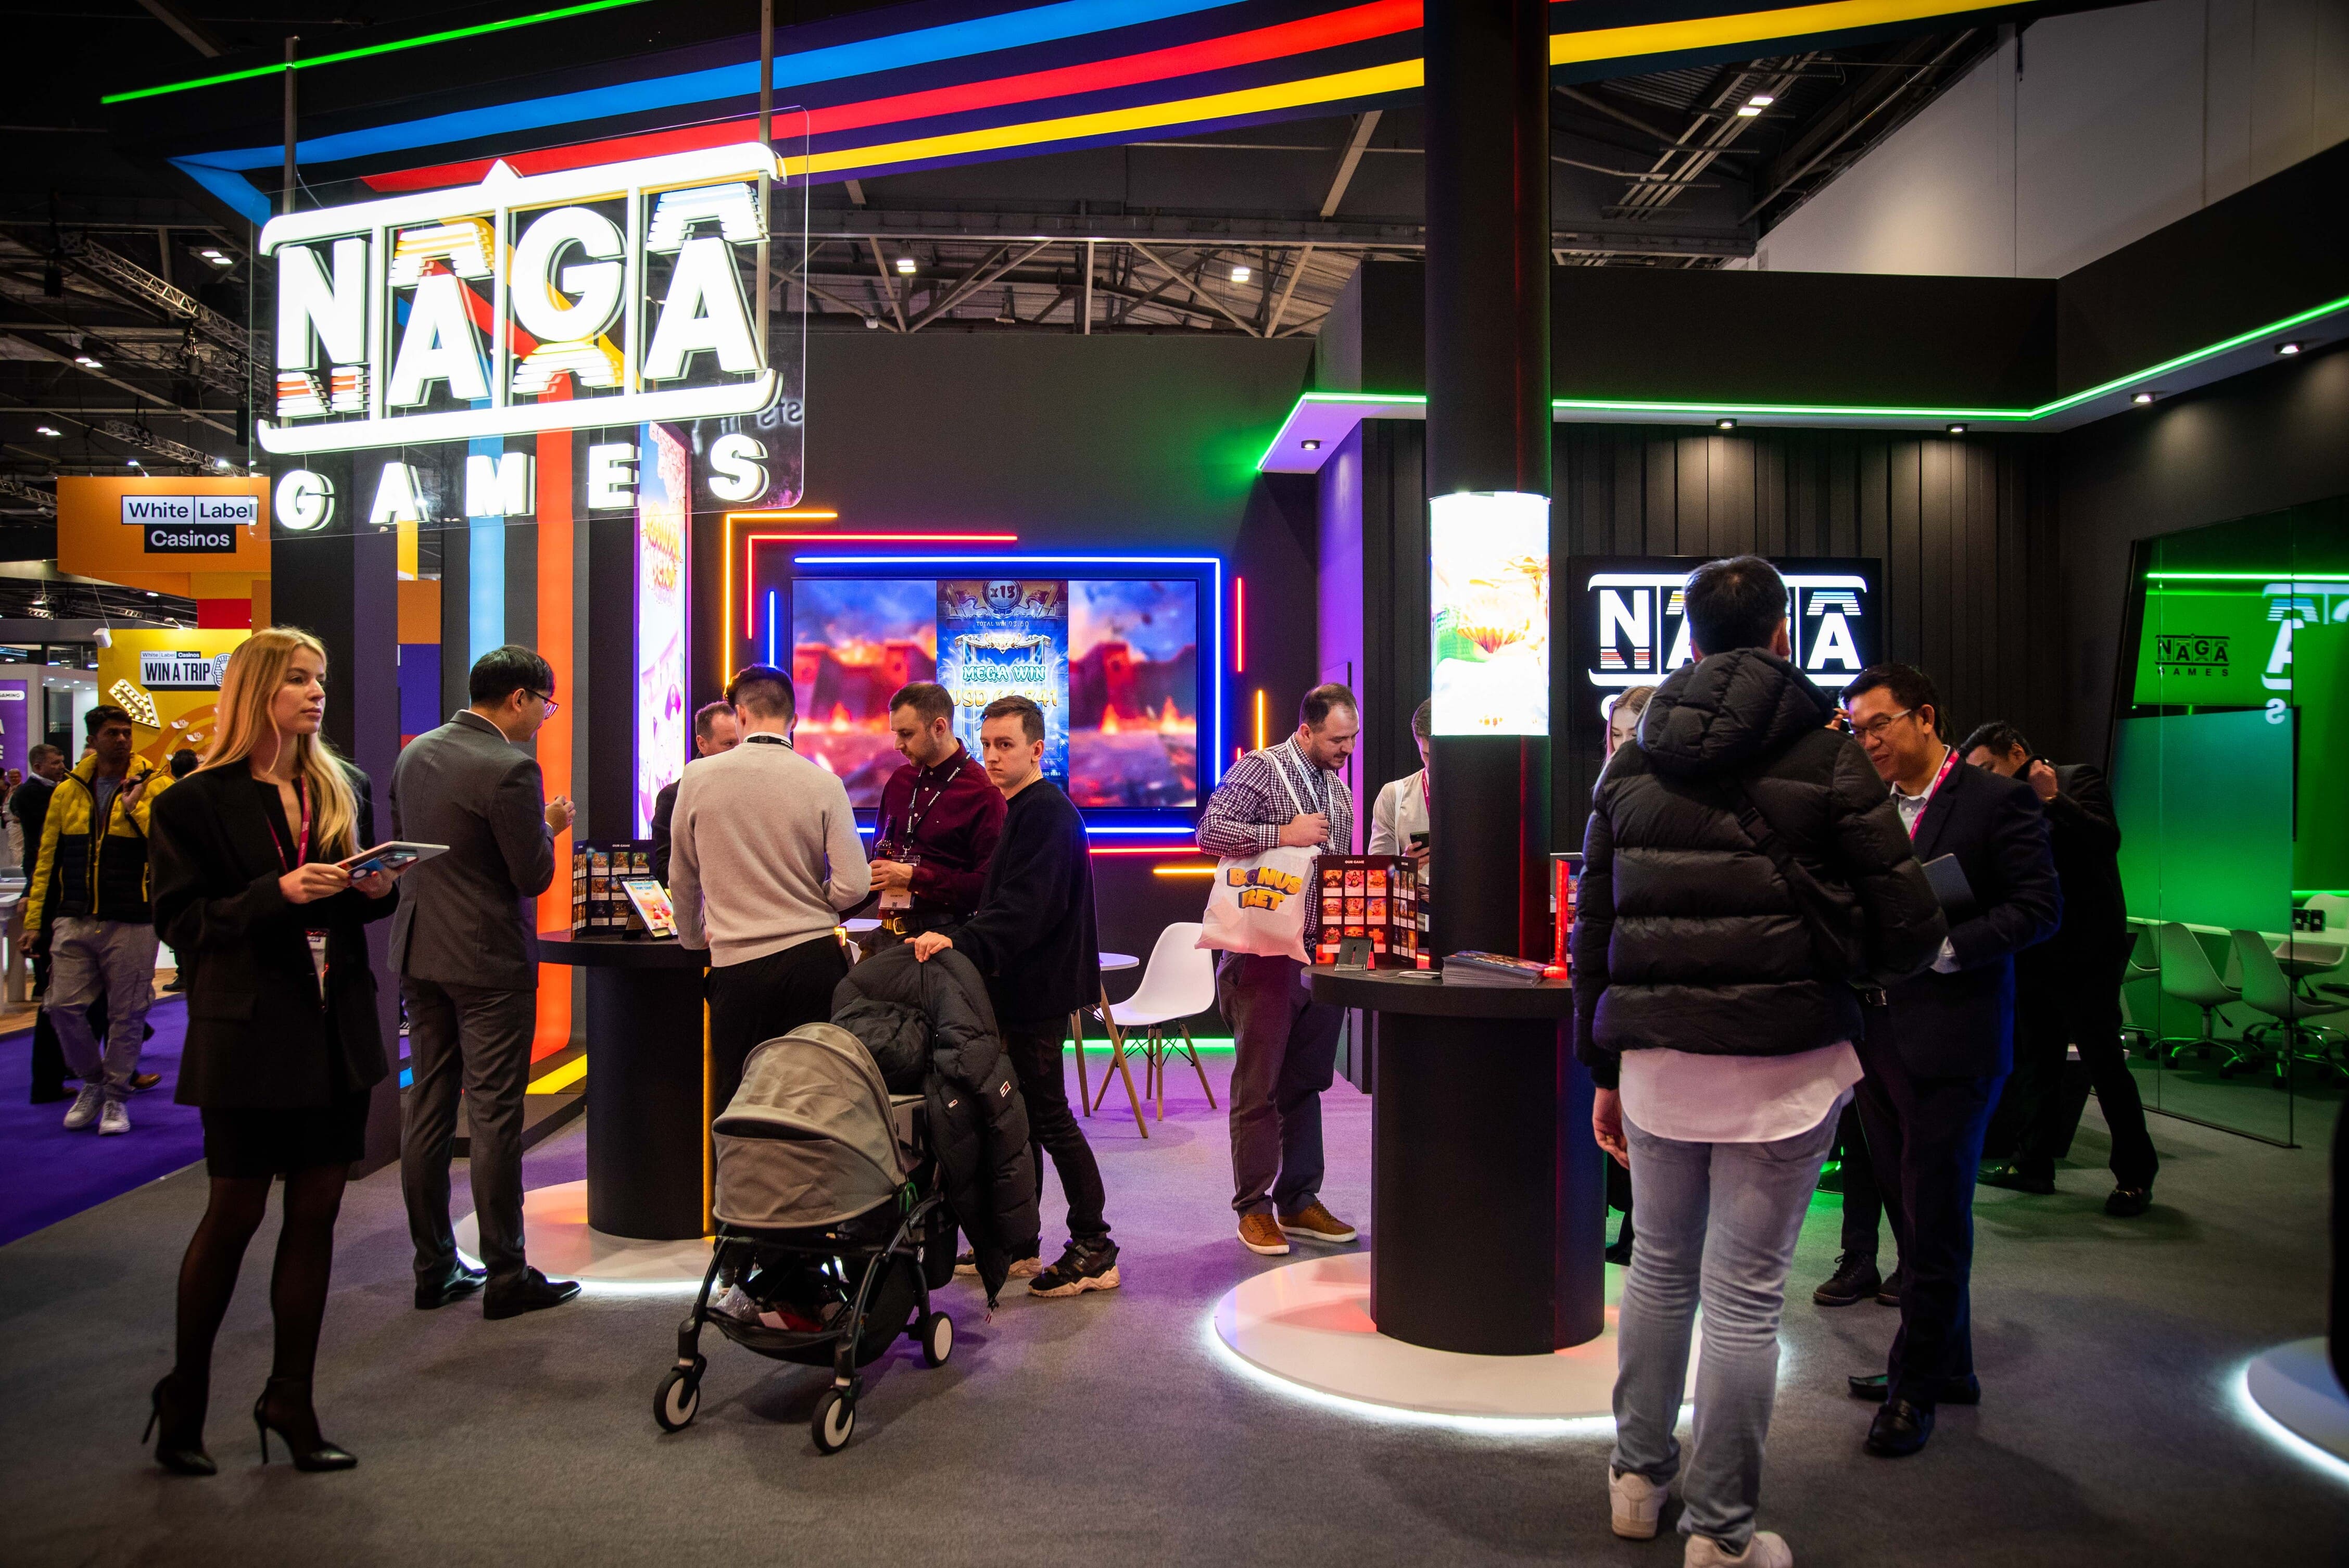 Naga Games' Debut at ICE UK: Inspiring Innovation in Online Slots's related images